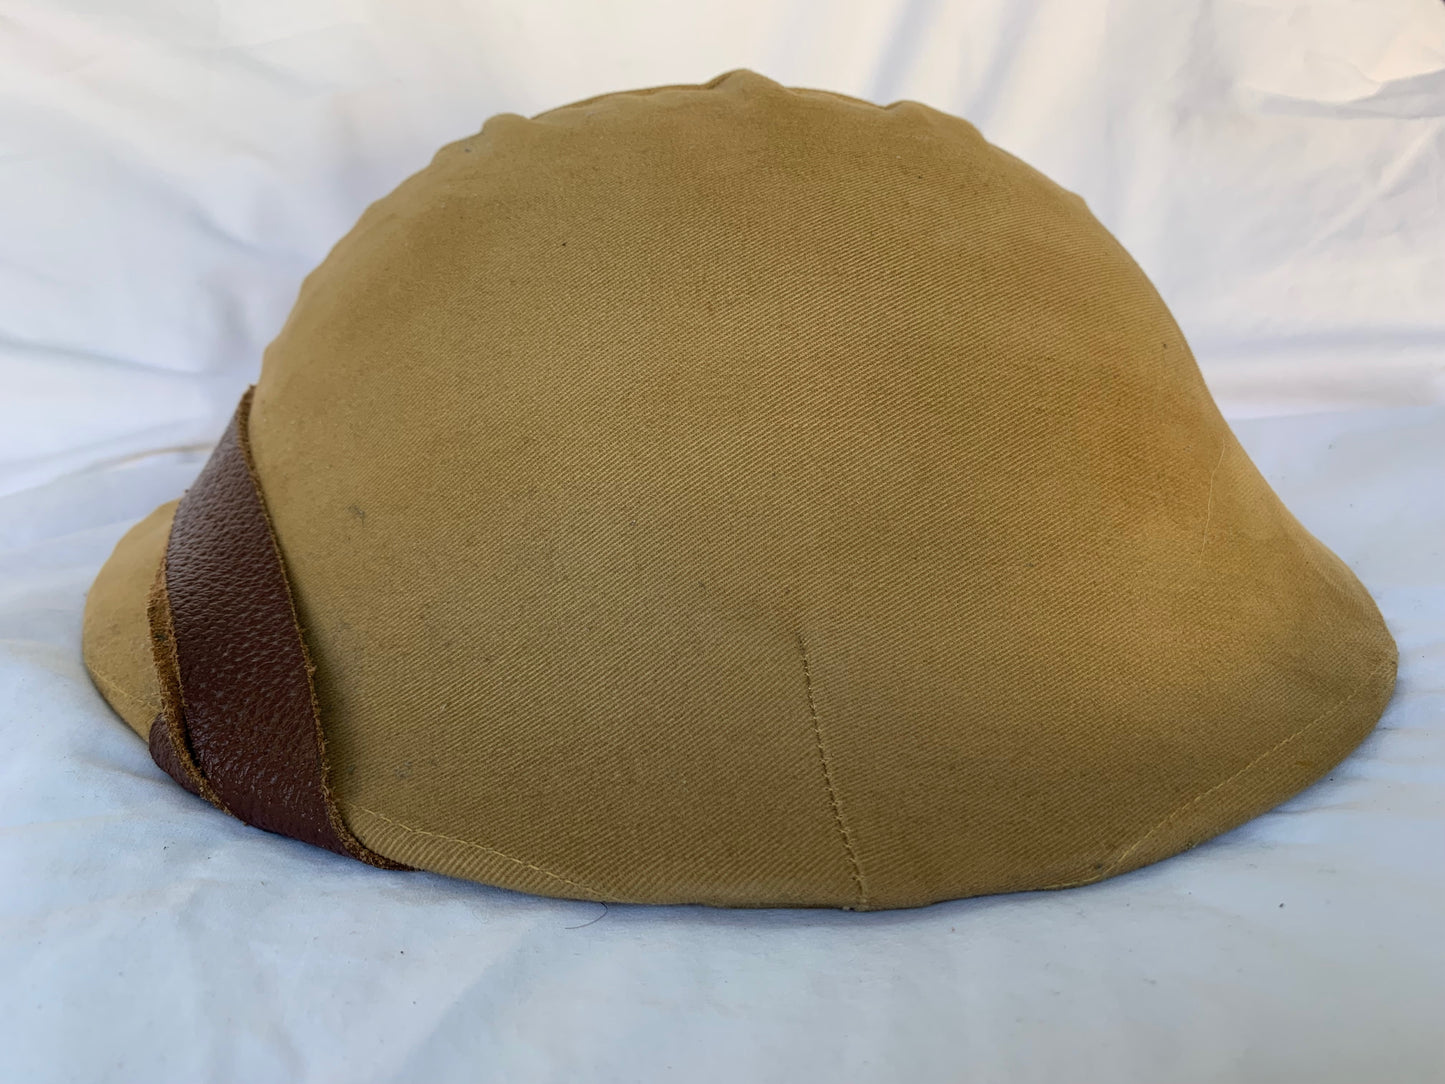 WW1 British Tommy Helmet with Cover, Liner and Chinstrap